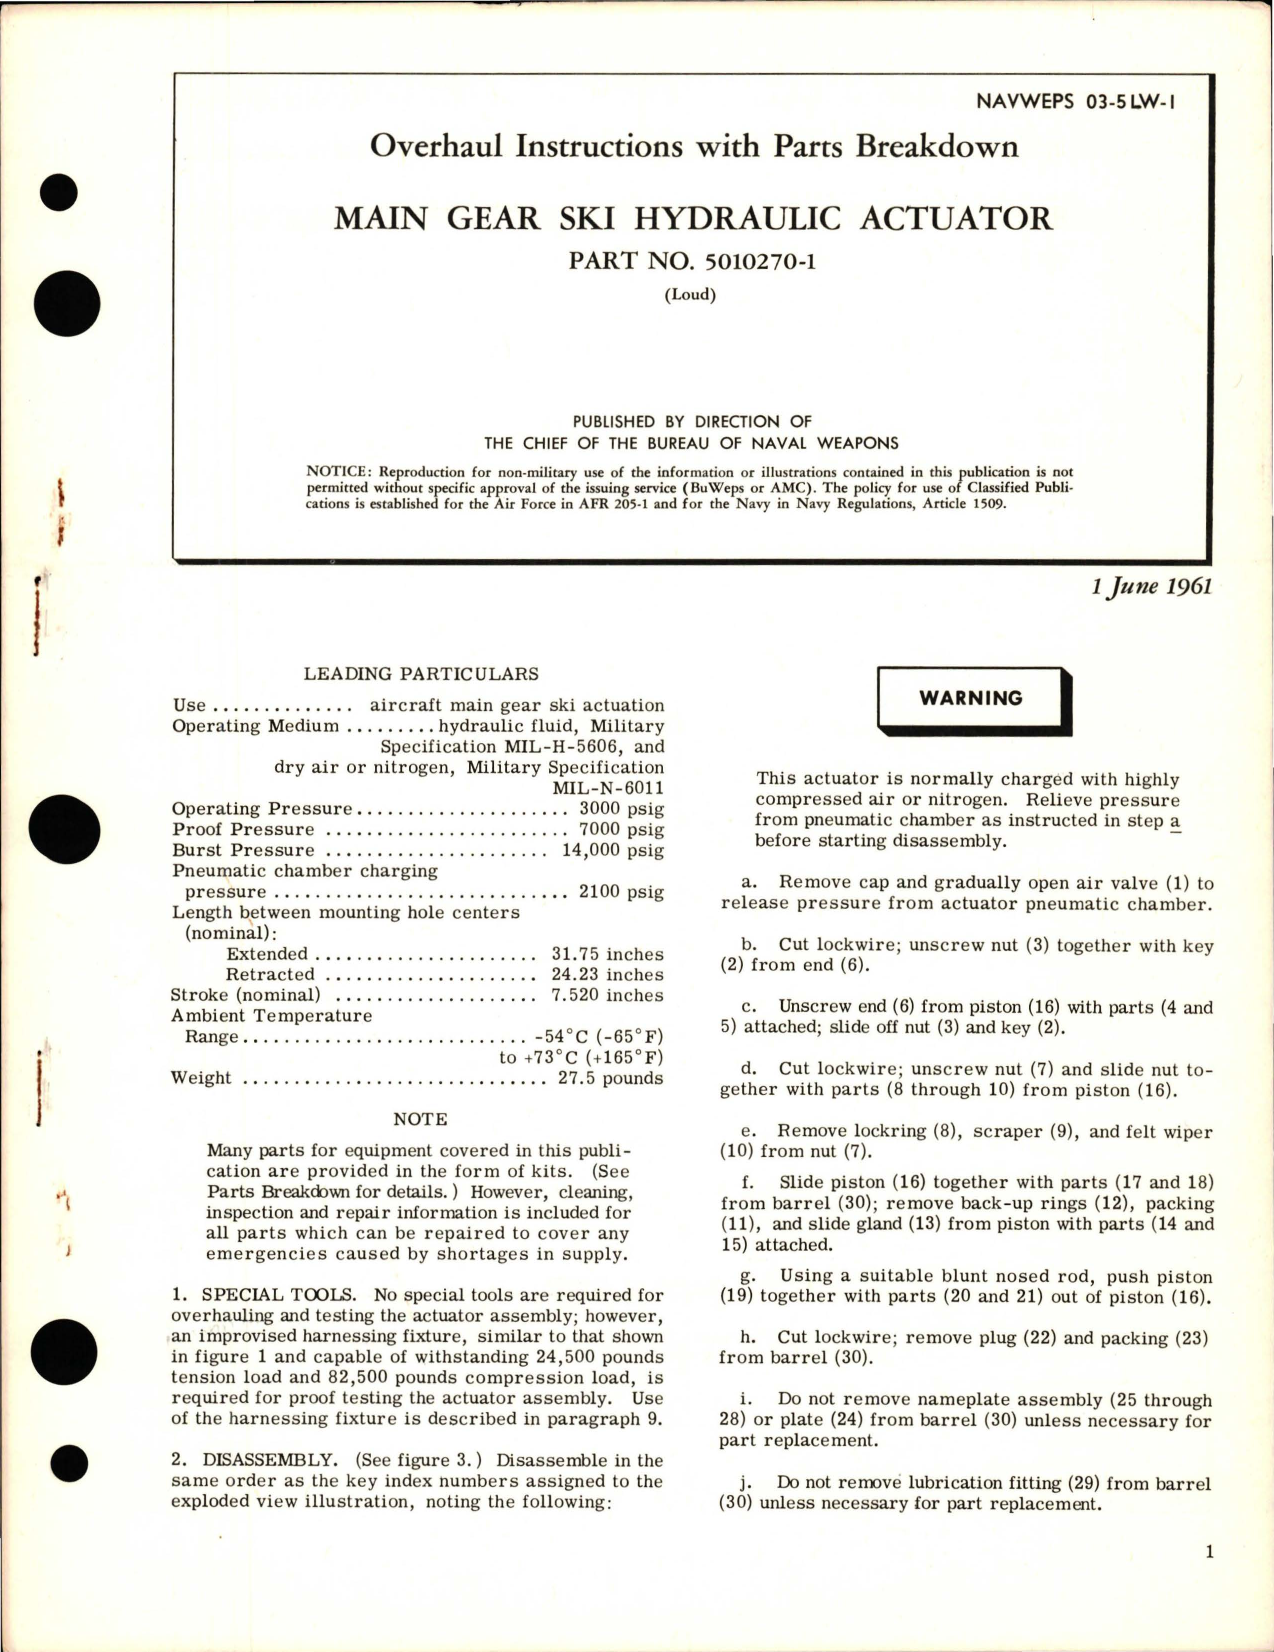 Sample page 1 from AirCorps Library document: Overhaul Instructions with Parts Breakdown for Main Gear Ski Hydraulic Actuator - Part 5010270-1